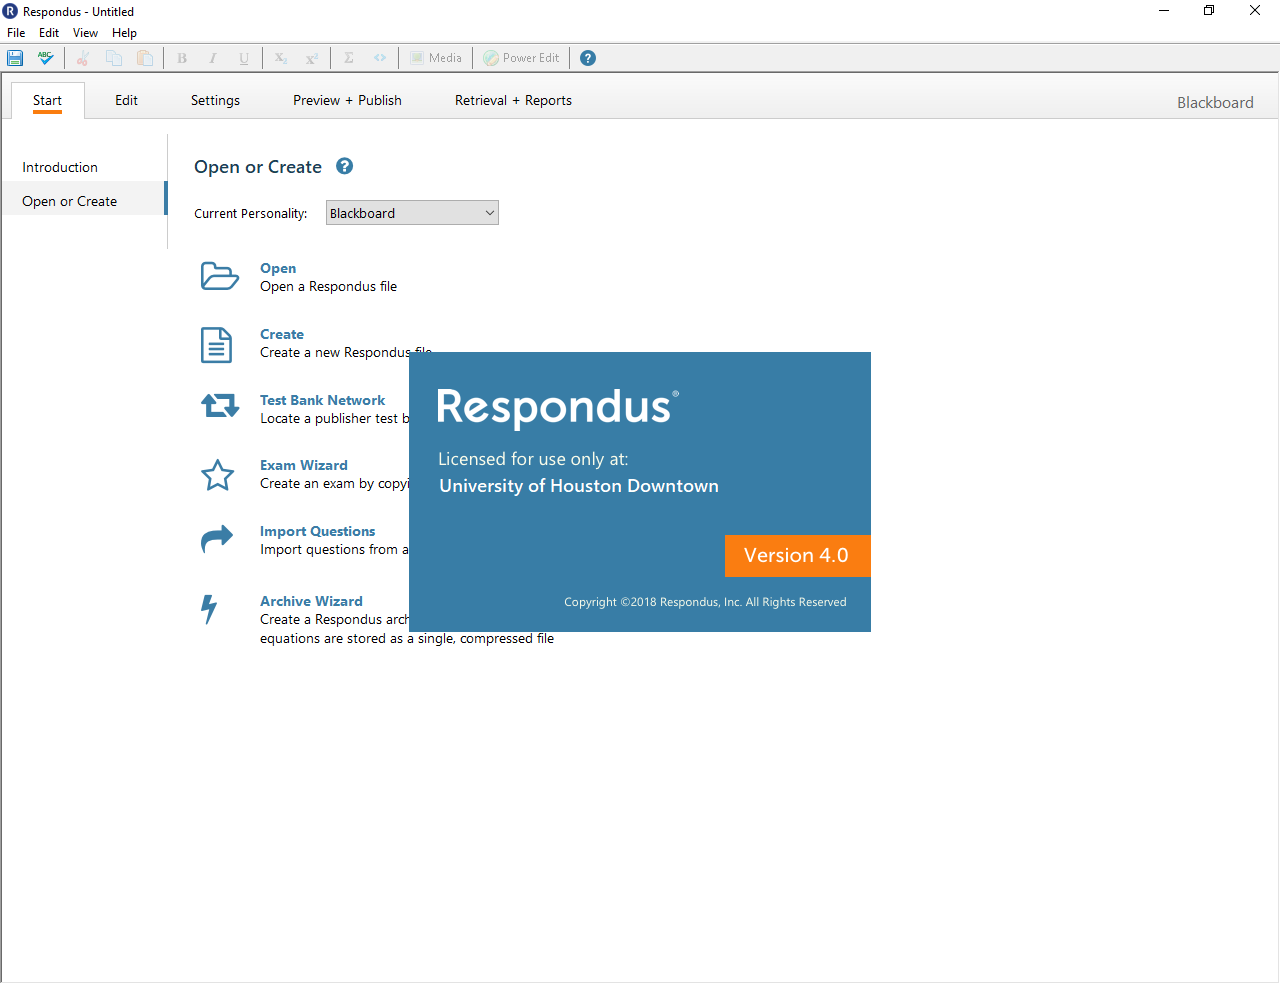 Launching Respondus 4.0 into the entry page.